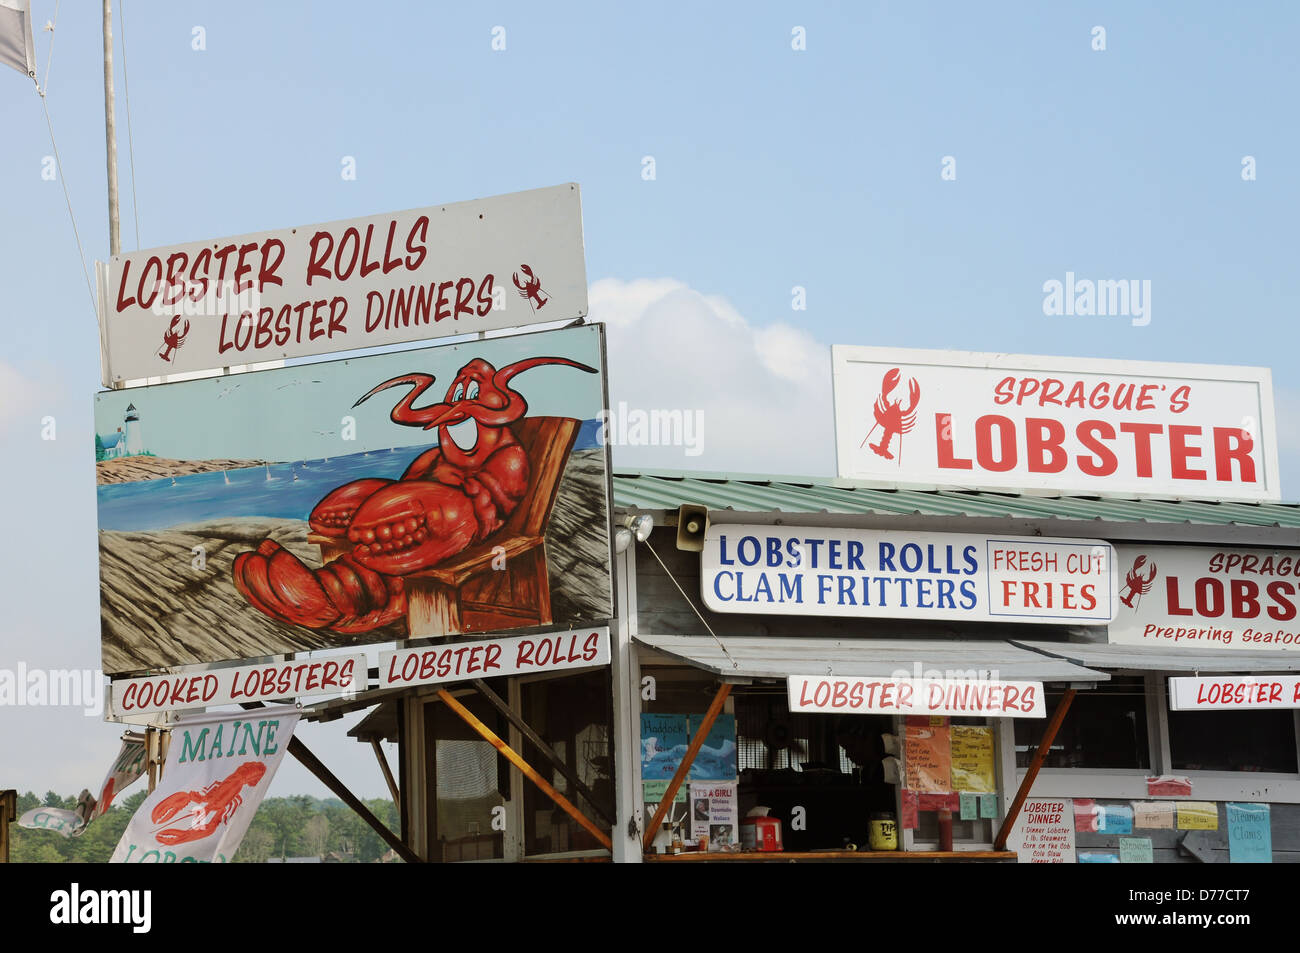 Lobster food stand in Maine Stock Photo